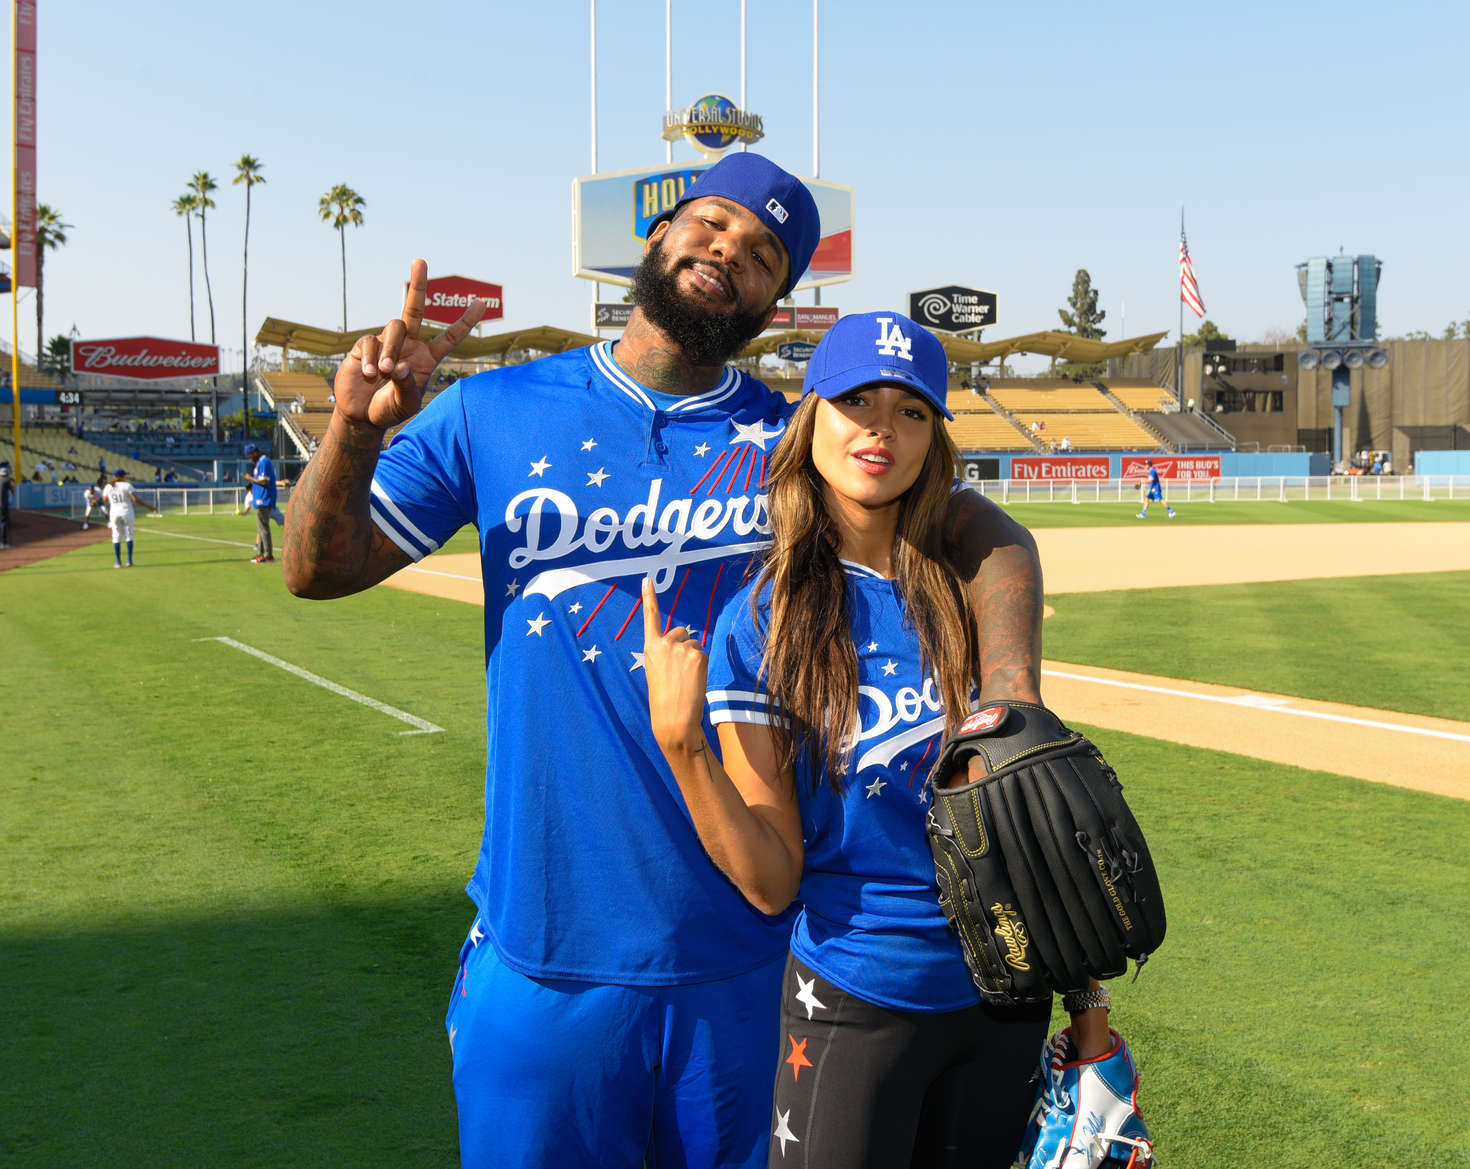 dodgers hollywood stars jersey